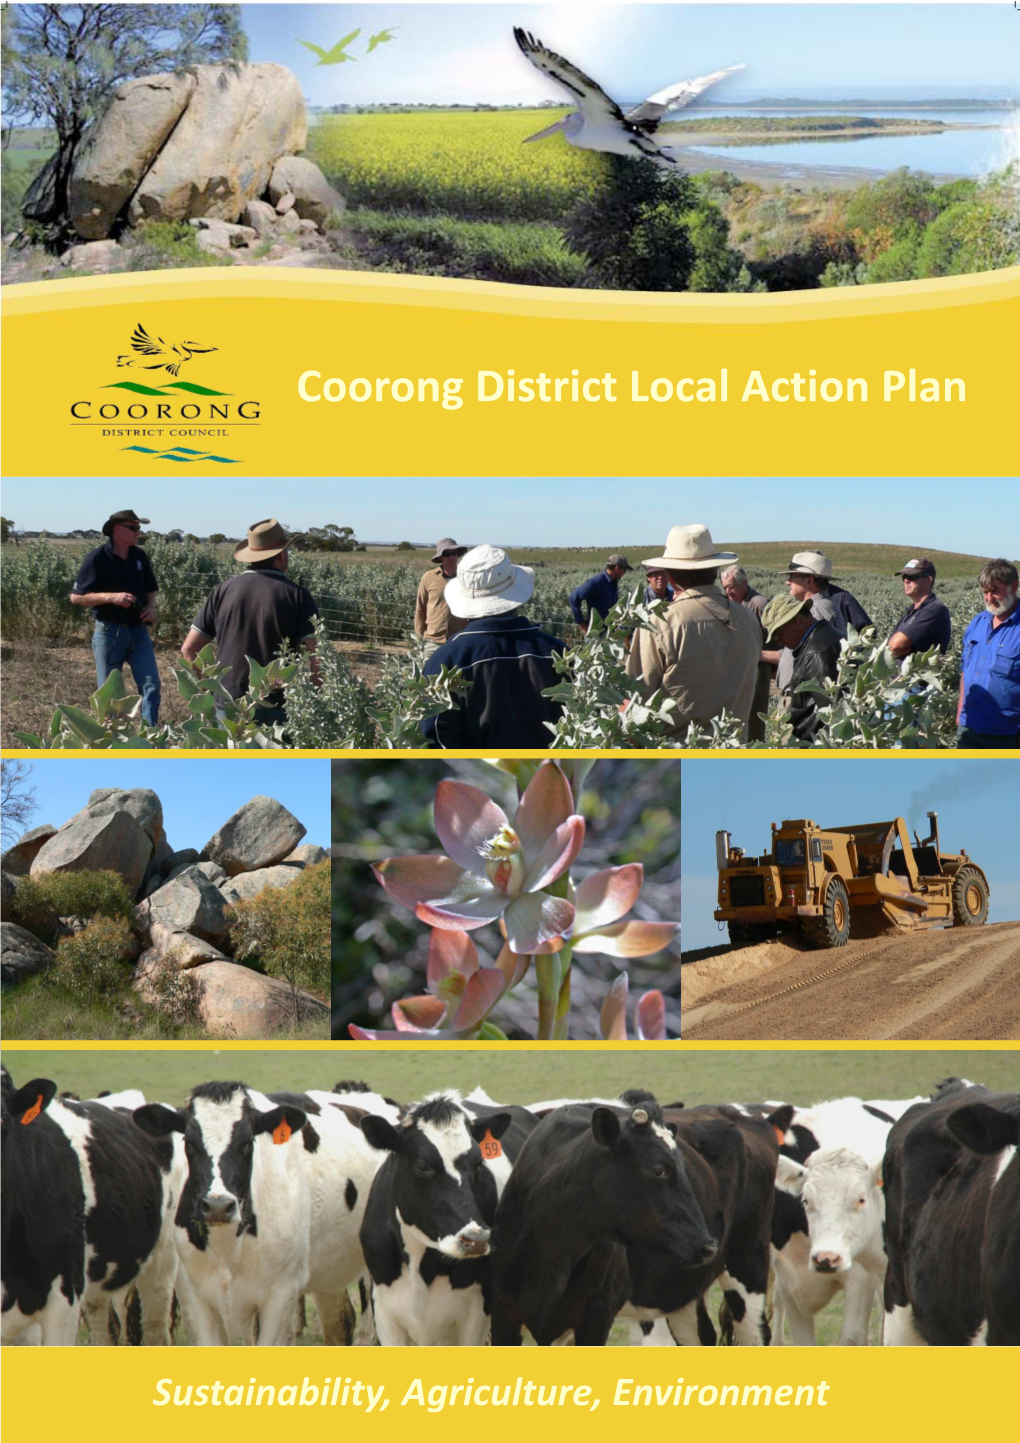 Coorong District Local Action Plan